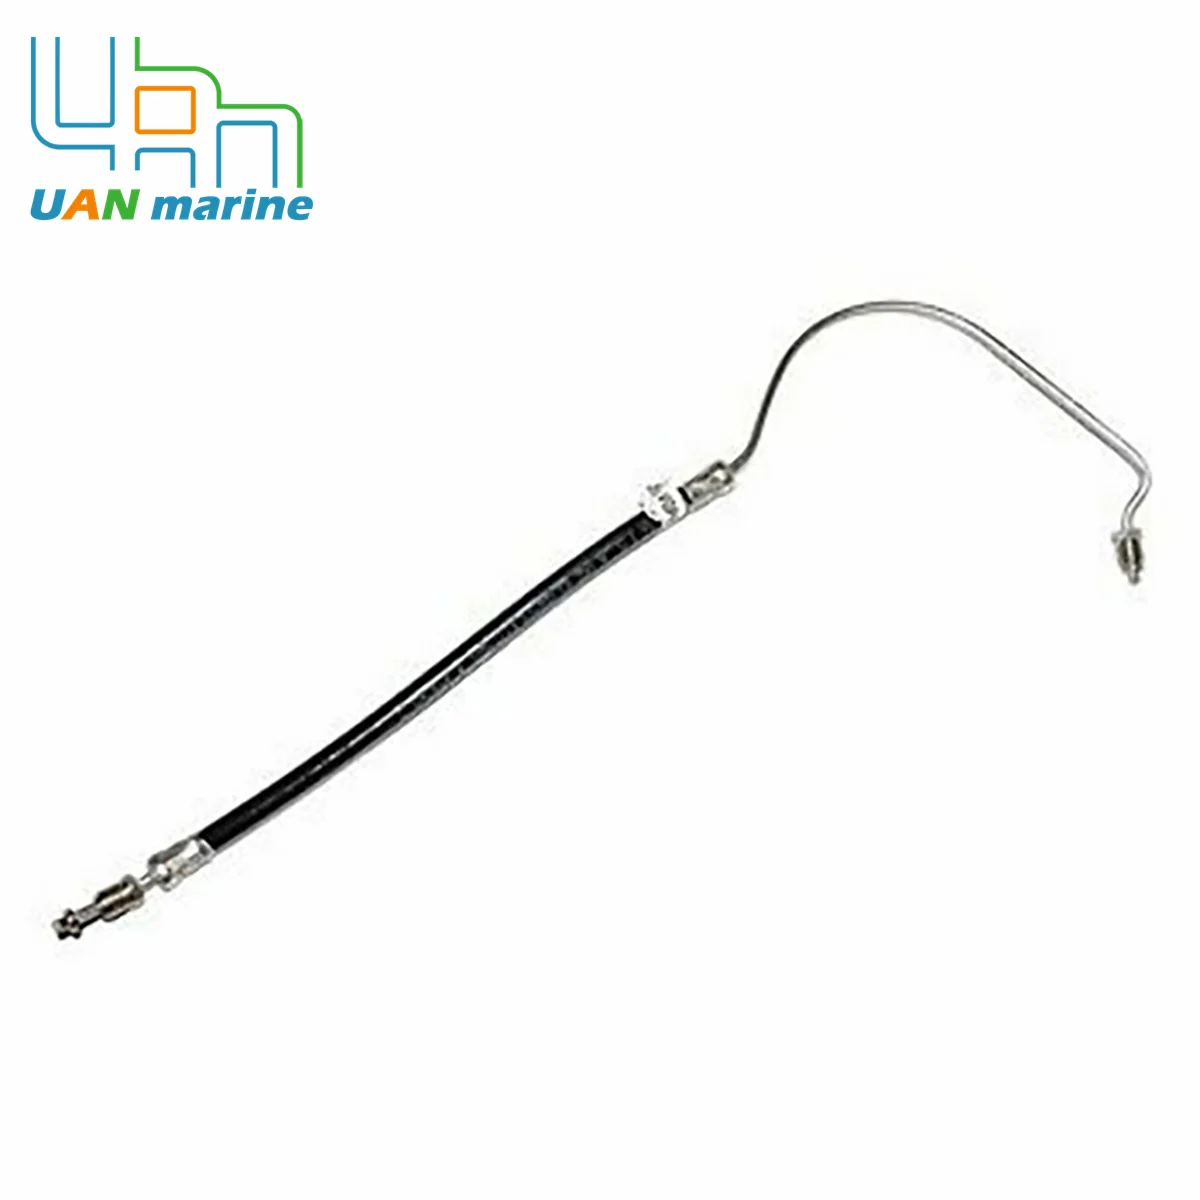 Hydraulic Trim Hose OMC Volvo SX-M Port Down with Fore Connections 1994-Up  3857523 1x 12v 4 pin relay with socket base wires fuse 18awg pre wired cable fits for a wider range of automotive accessory connections